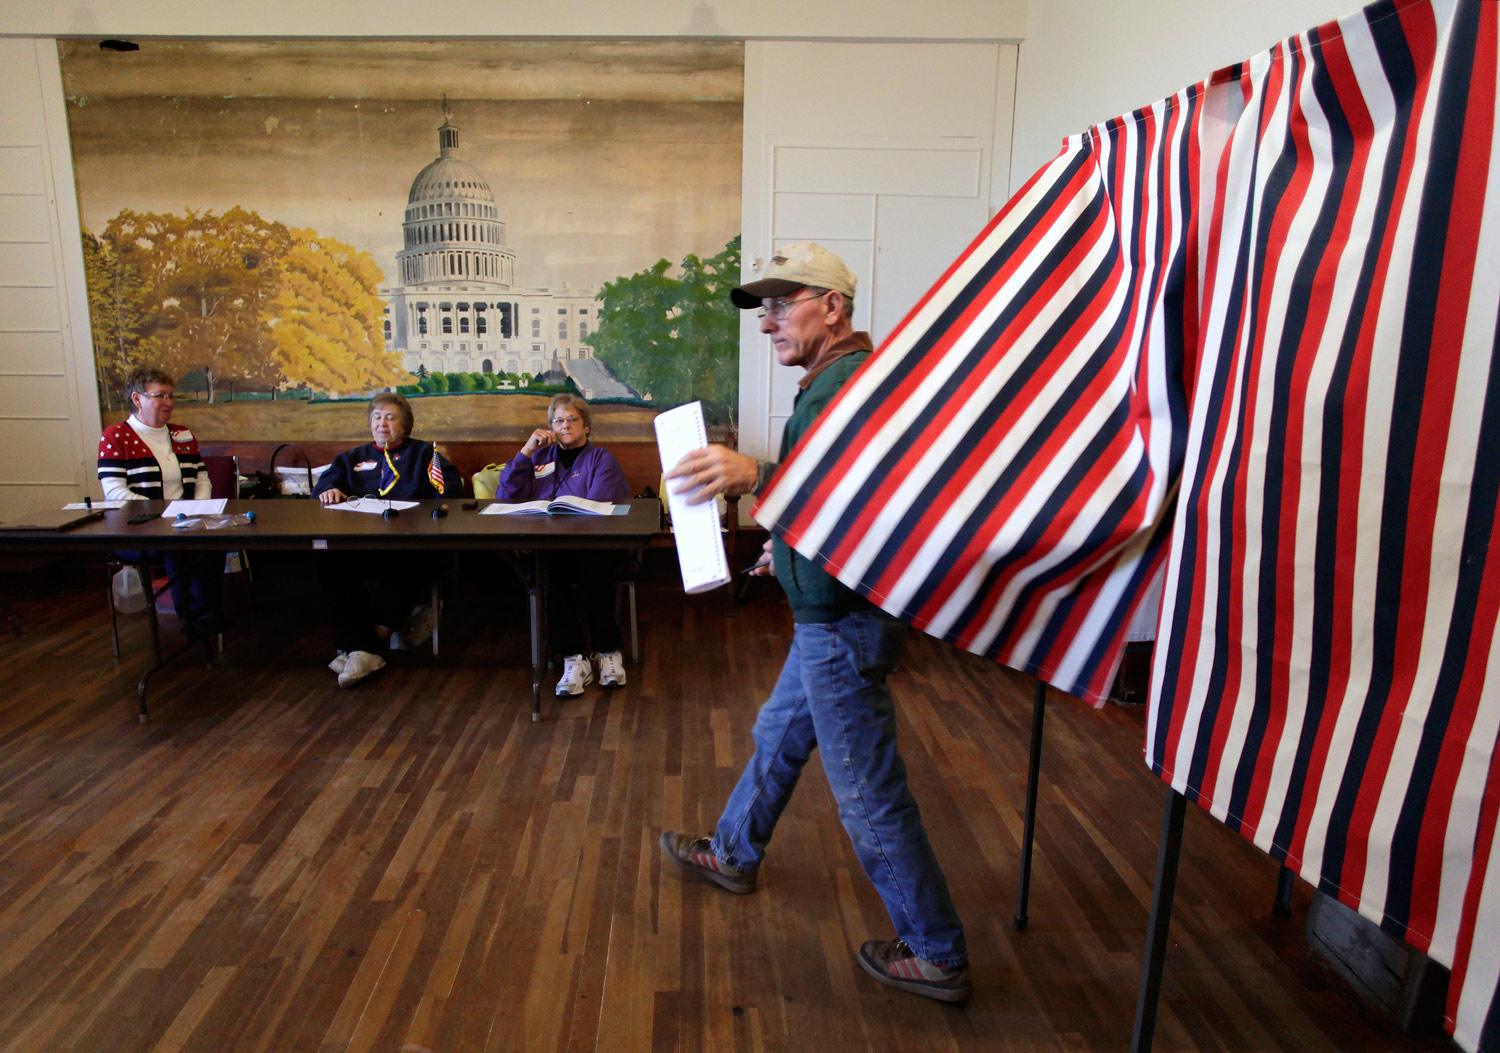 A Major Blow to Voting Rights in Wisconsin